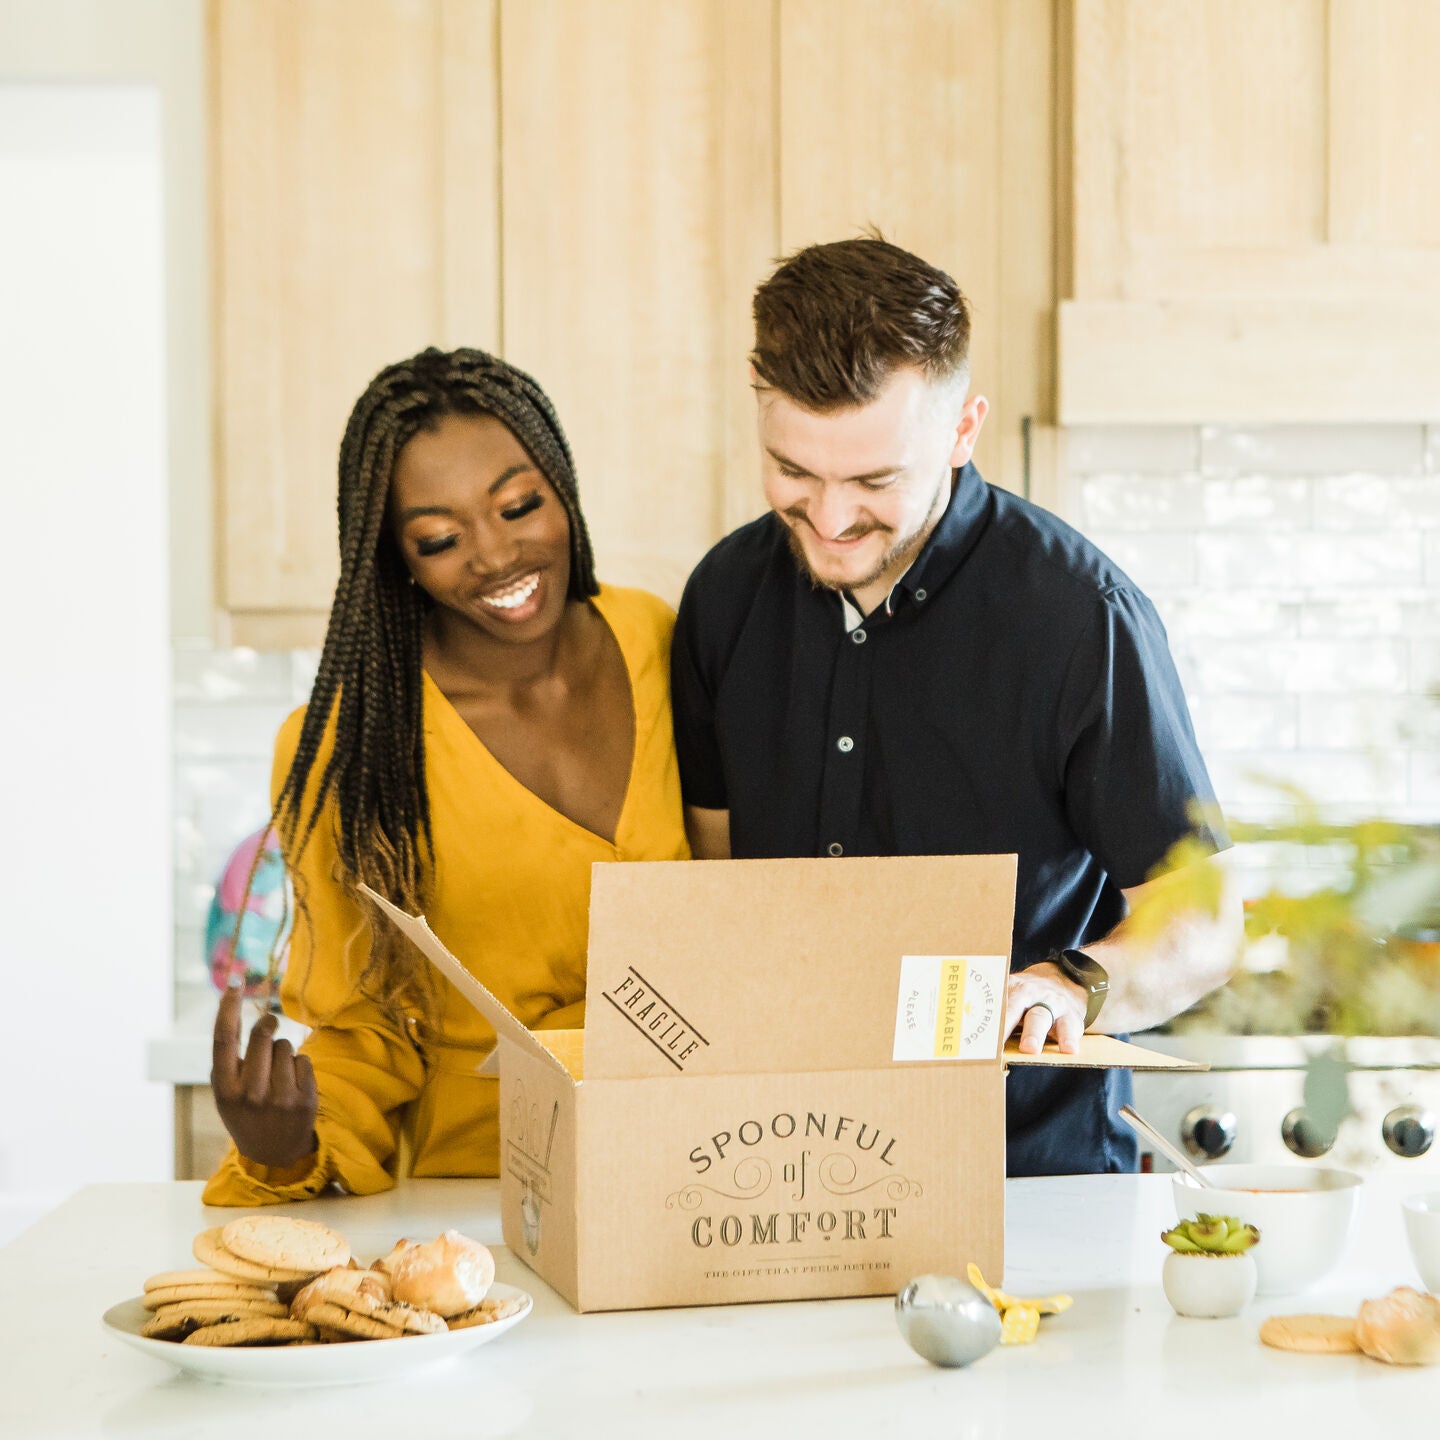 Man and woman opening Spoonful of Comfort soup package.